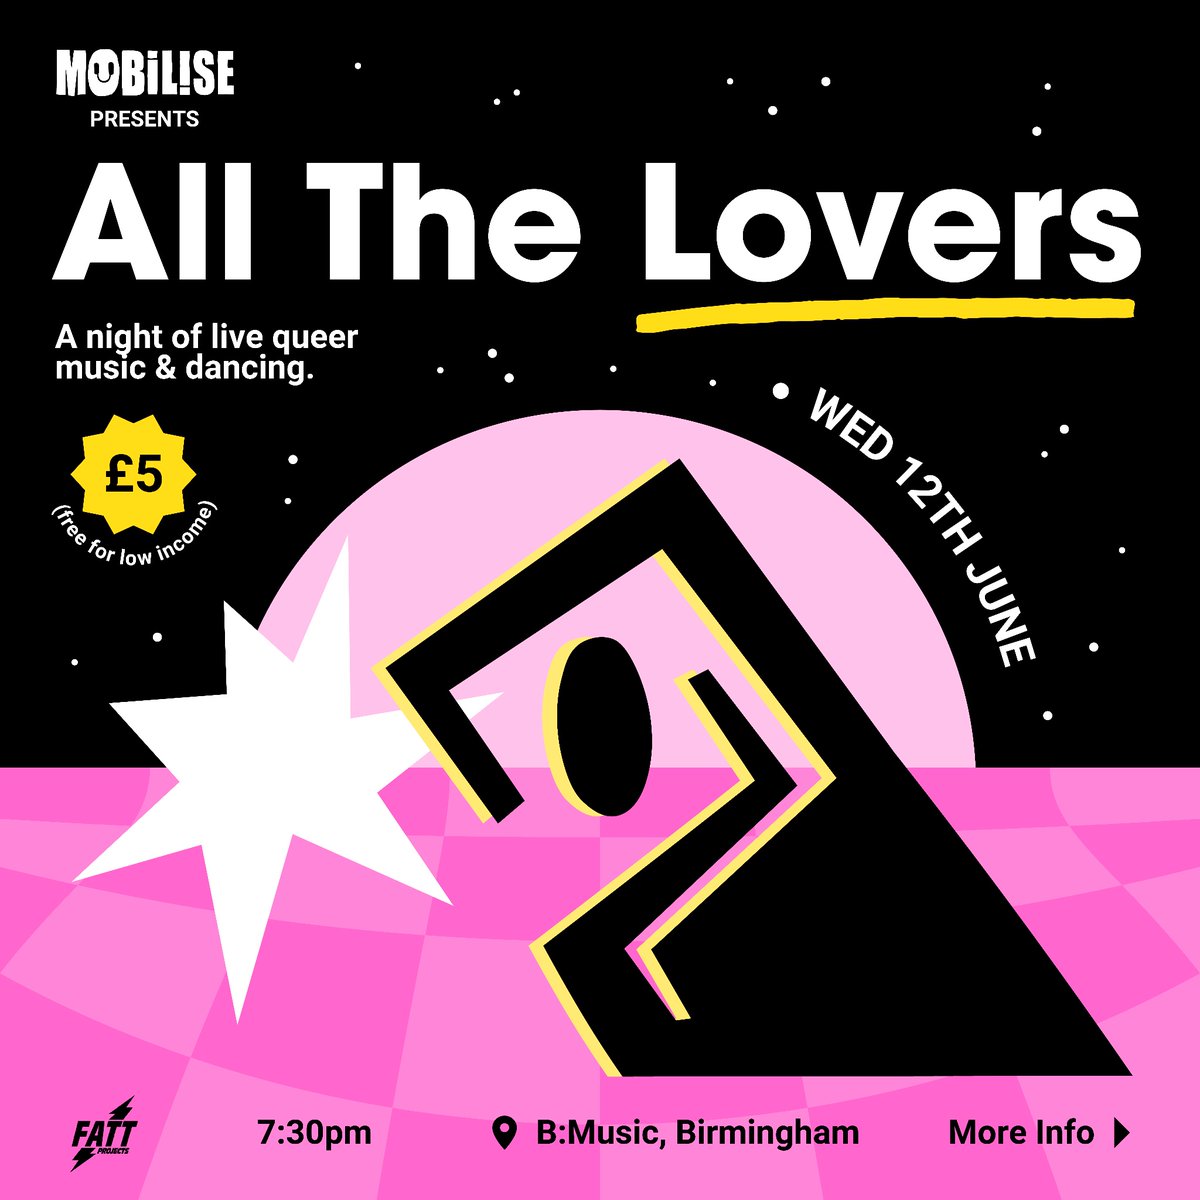 Ok babs, we are super excited to announce a day of events to mark the end of MOBILISE on Weds 12th June at @BMusic_Ltd ⚡️WHAT WE FOUND ON THE DANCEFLOOR: a summit for independent party, events, & nightlife organisers. ⚡️ALL THE LOVERS: a night of live queer music & dancing.